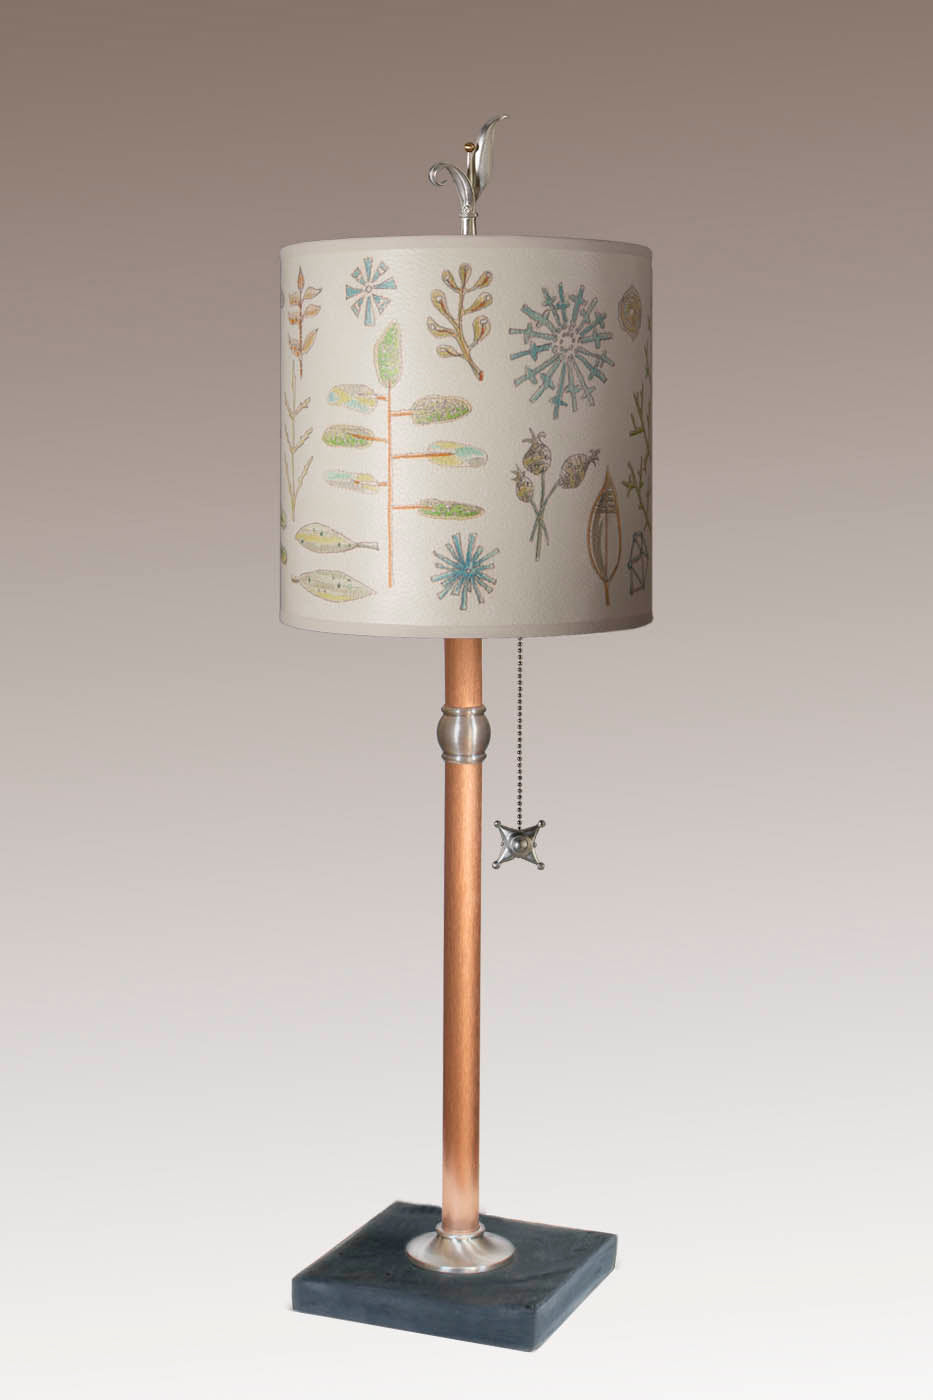 Janna Ugone &amp; Co Table Lamp Copper Table Lamp with Medium Drum Shade in Field Chart